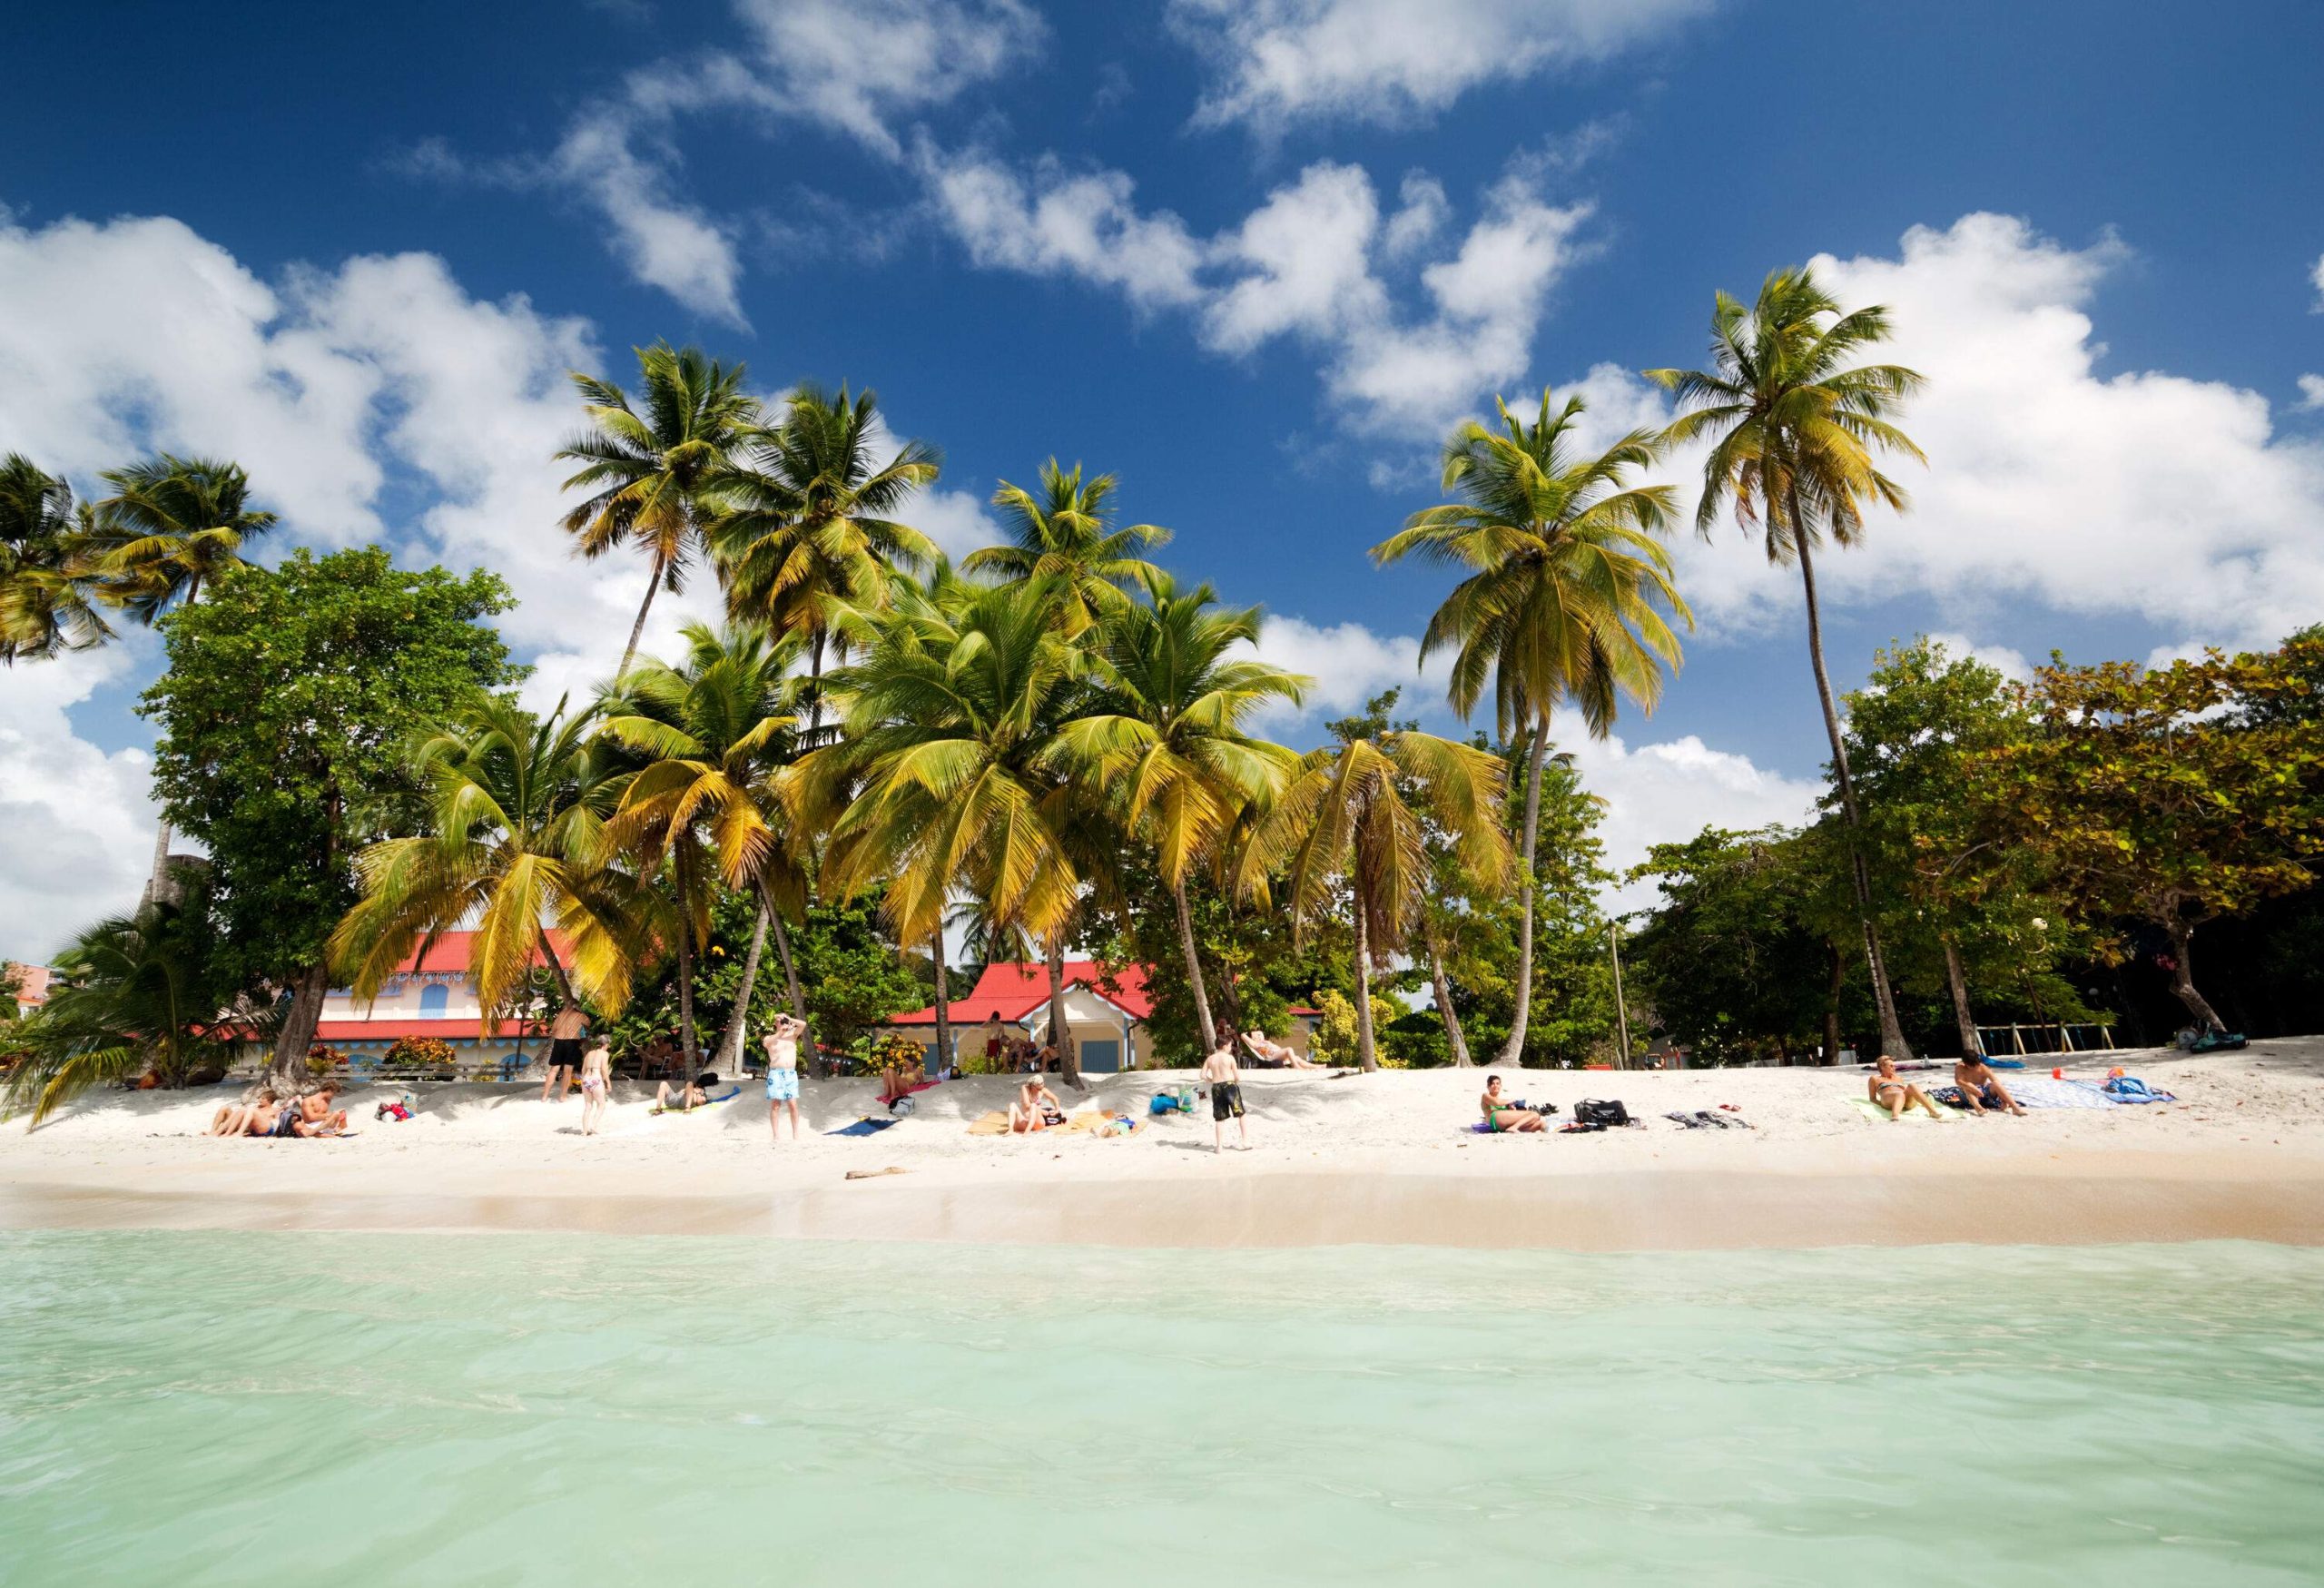 People lounging under the shade of palm trees on a tropical beach.